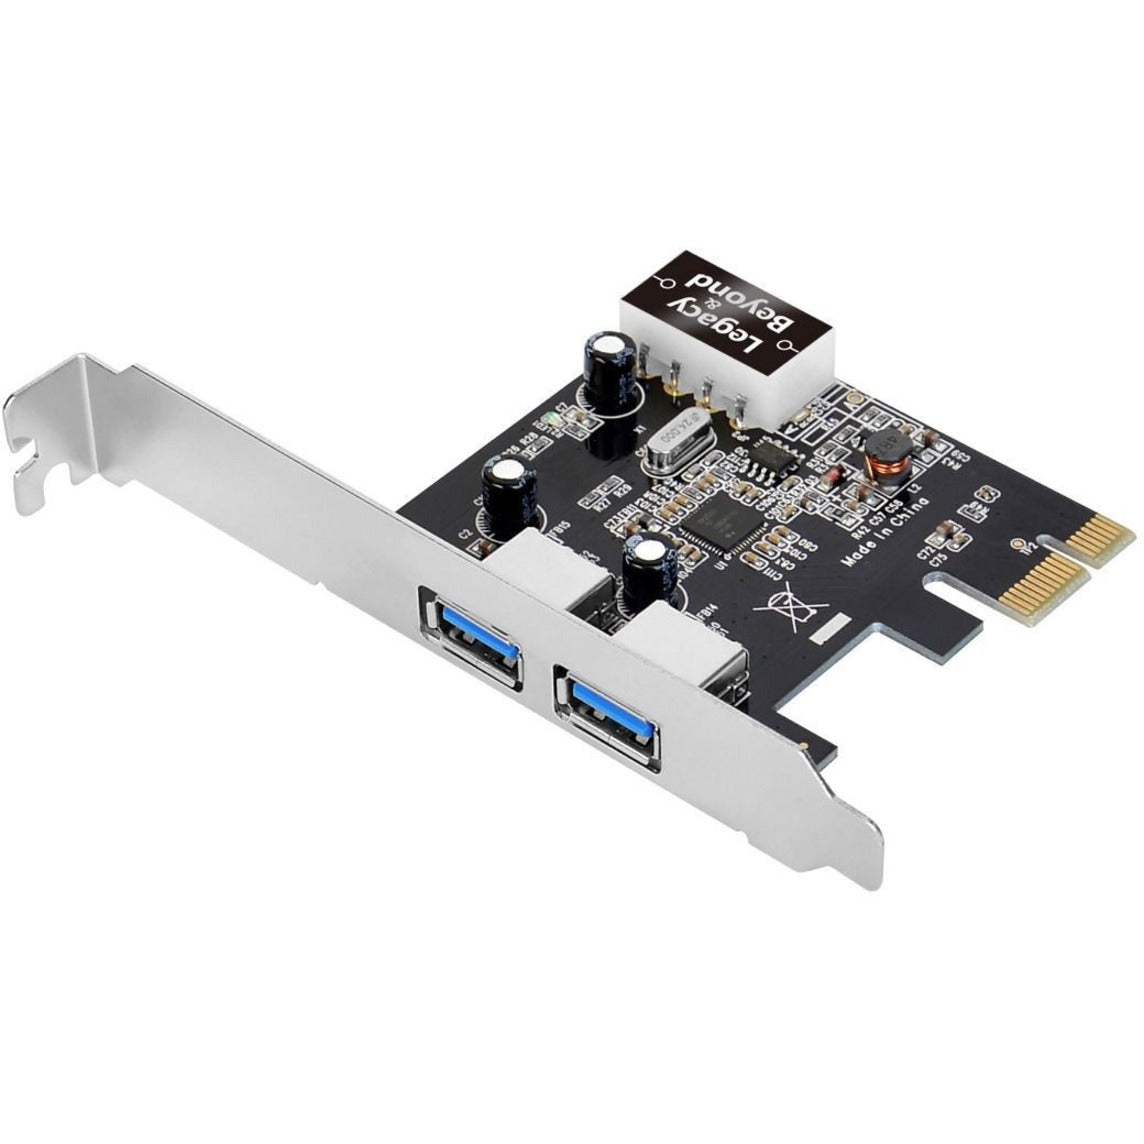 SIIG LB-US0314-S1 USB 3.0 2-Port (Ext) PCIe Host Card, High-Speed Data Transfer and Easy Expansion